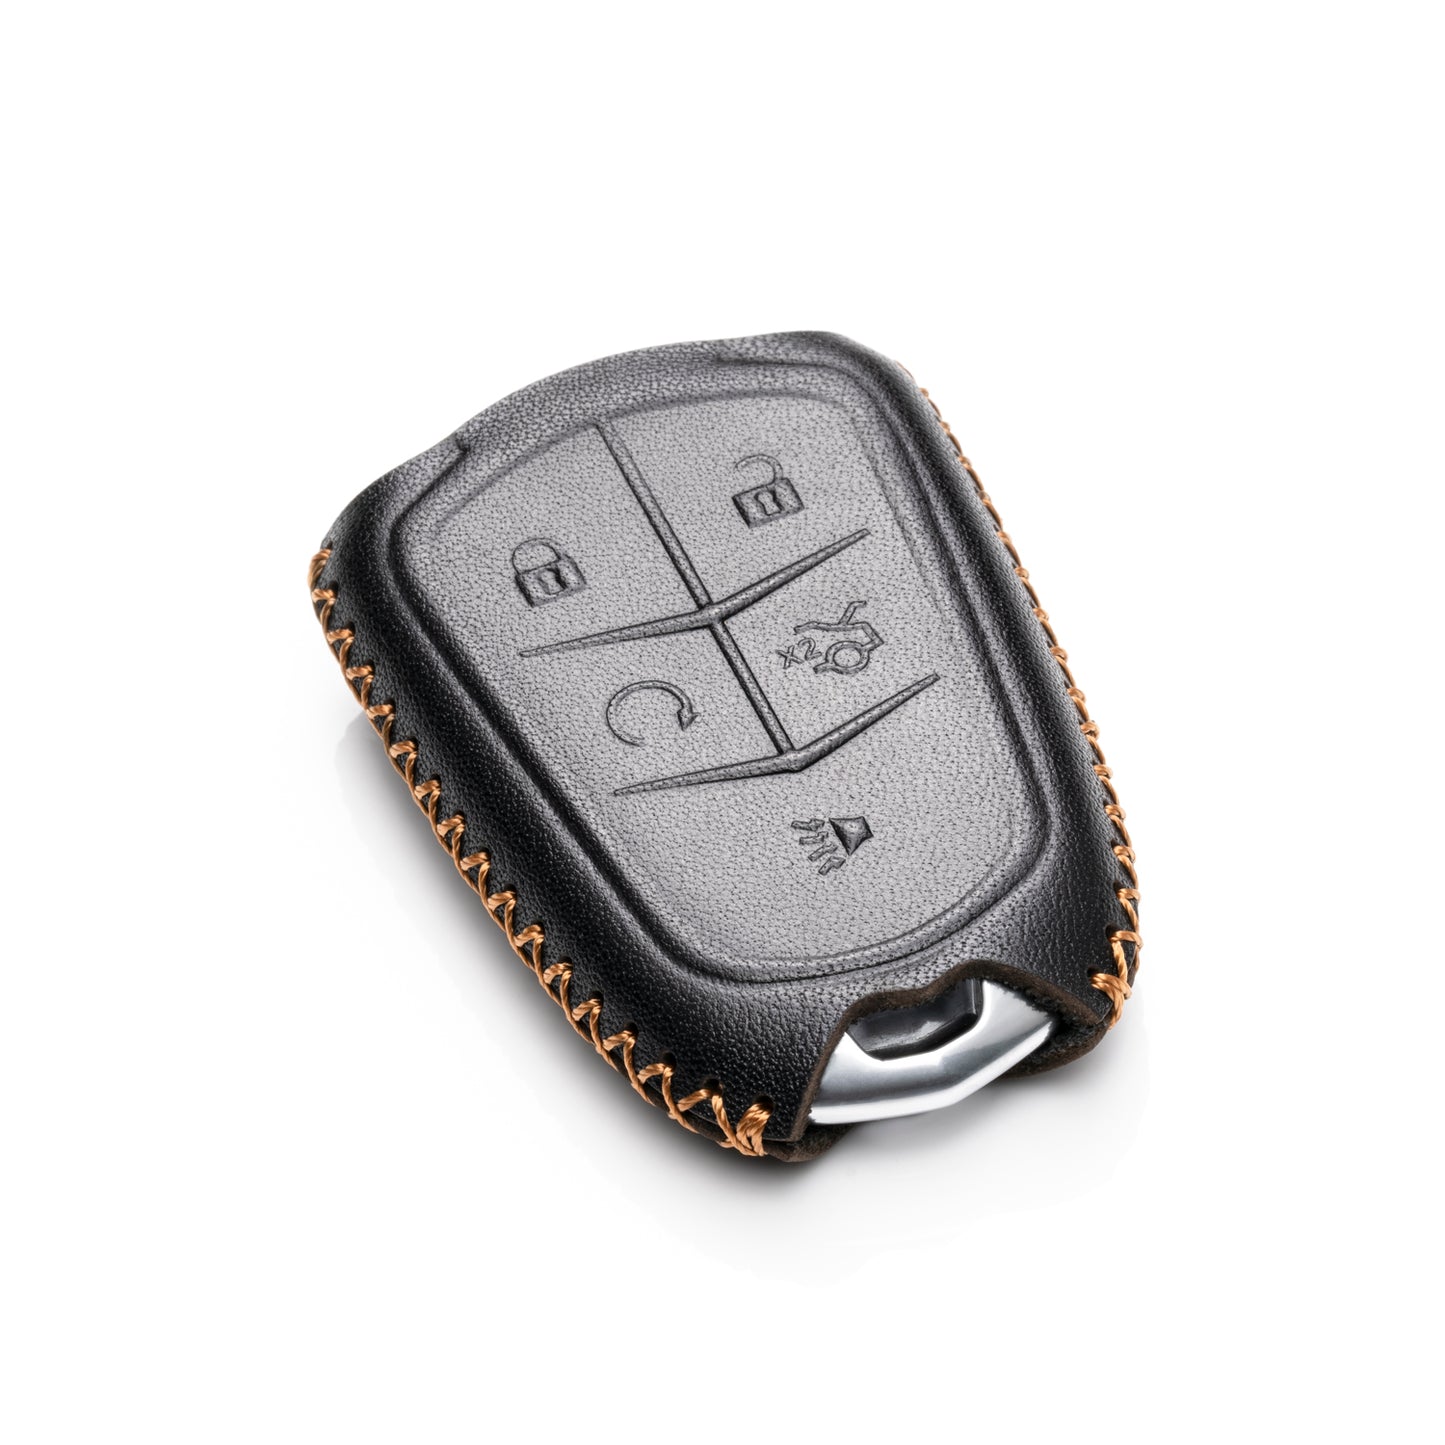 Vitodeco 5-Button Genuine Leather Smart Key Fob Case Cover Compatible for Cadillac ATS, CT6, CTS, SRX, XT5, XTS